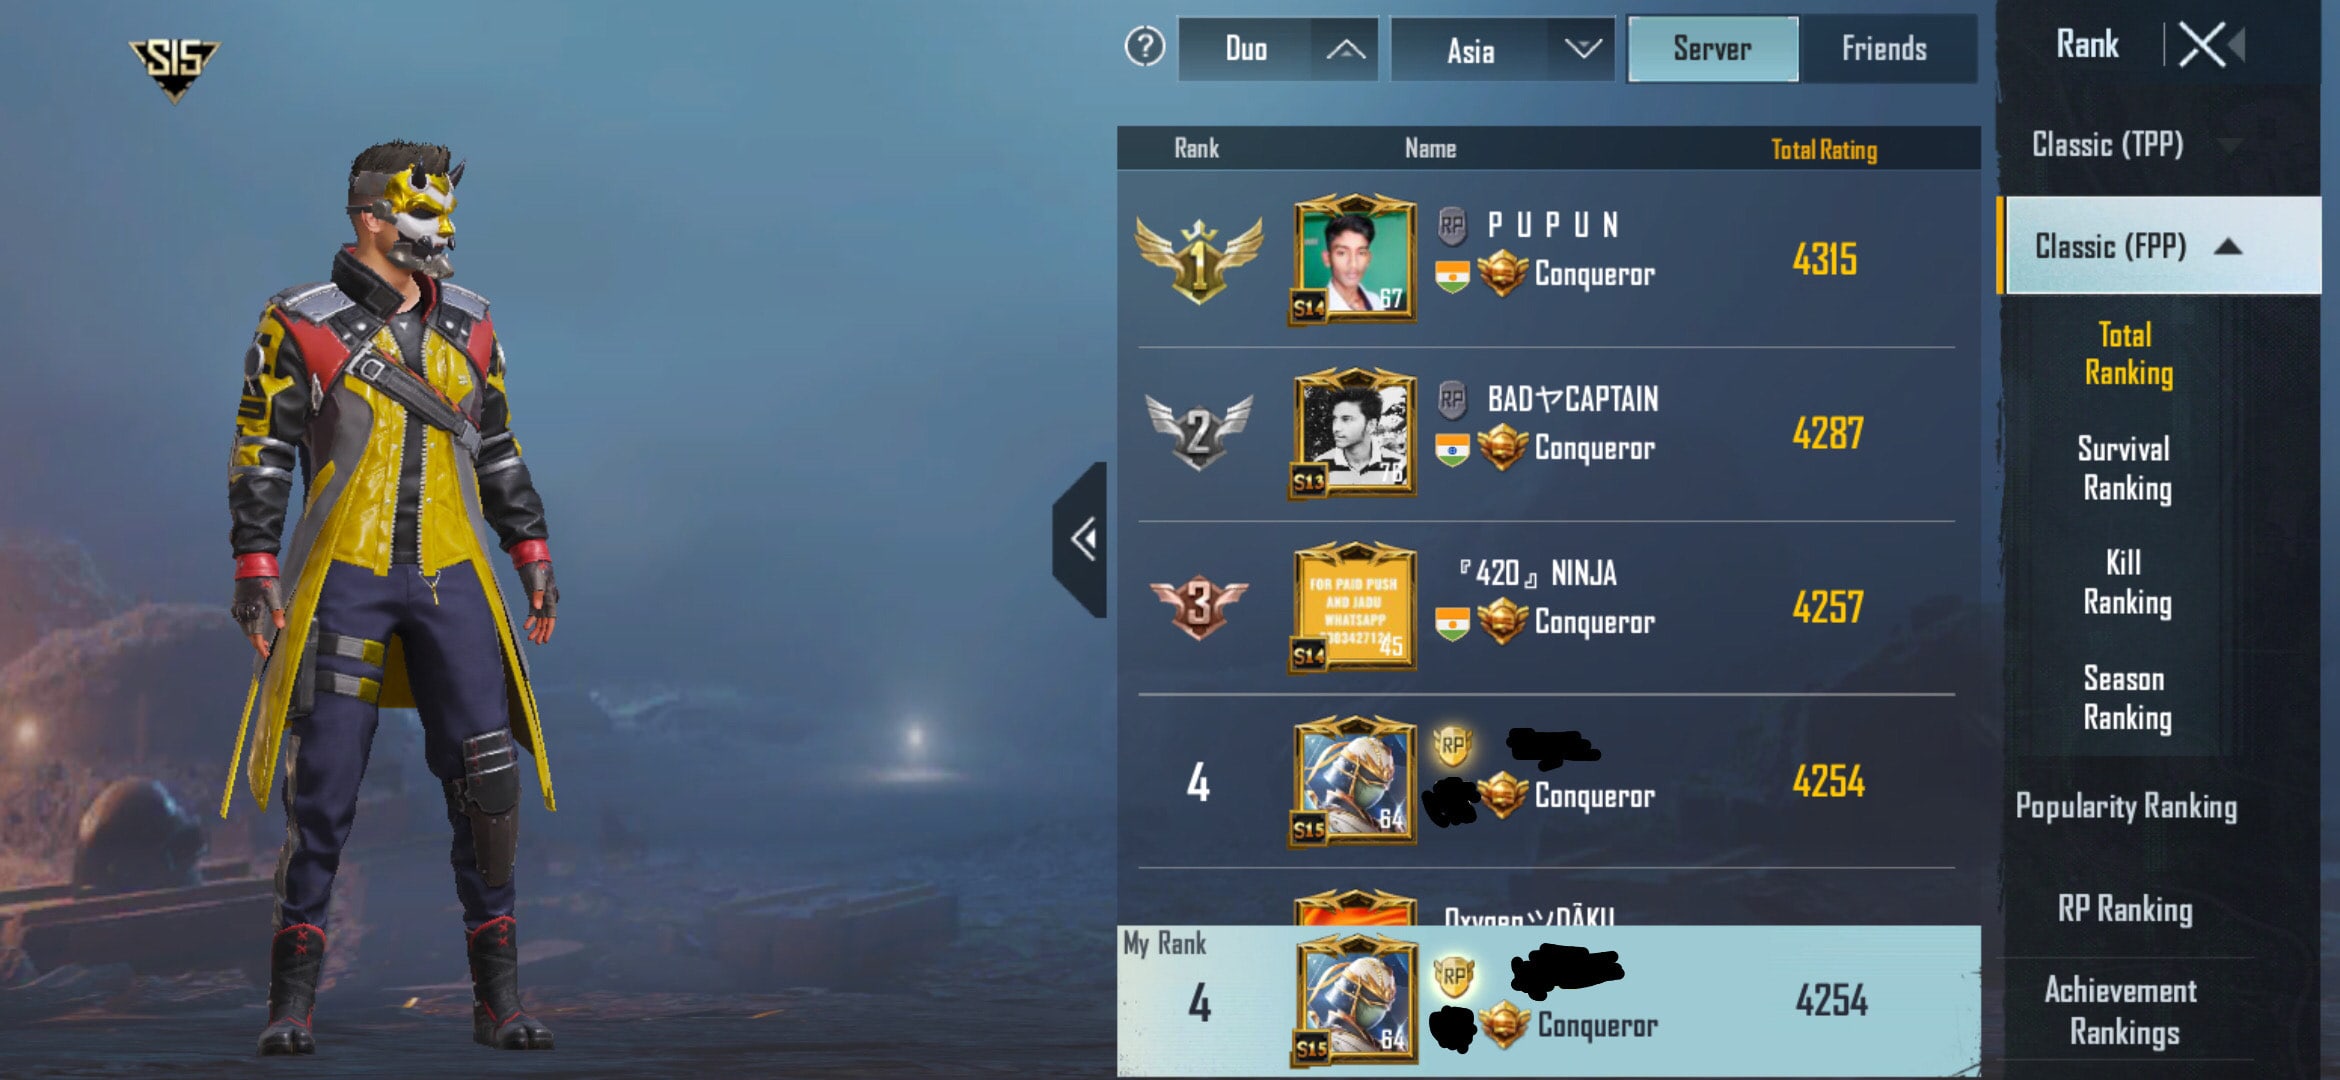 Push Rank Till Conqueror Or Ace In Pubg Mobile By Fahadkhalid1